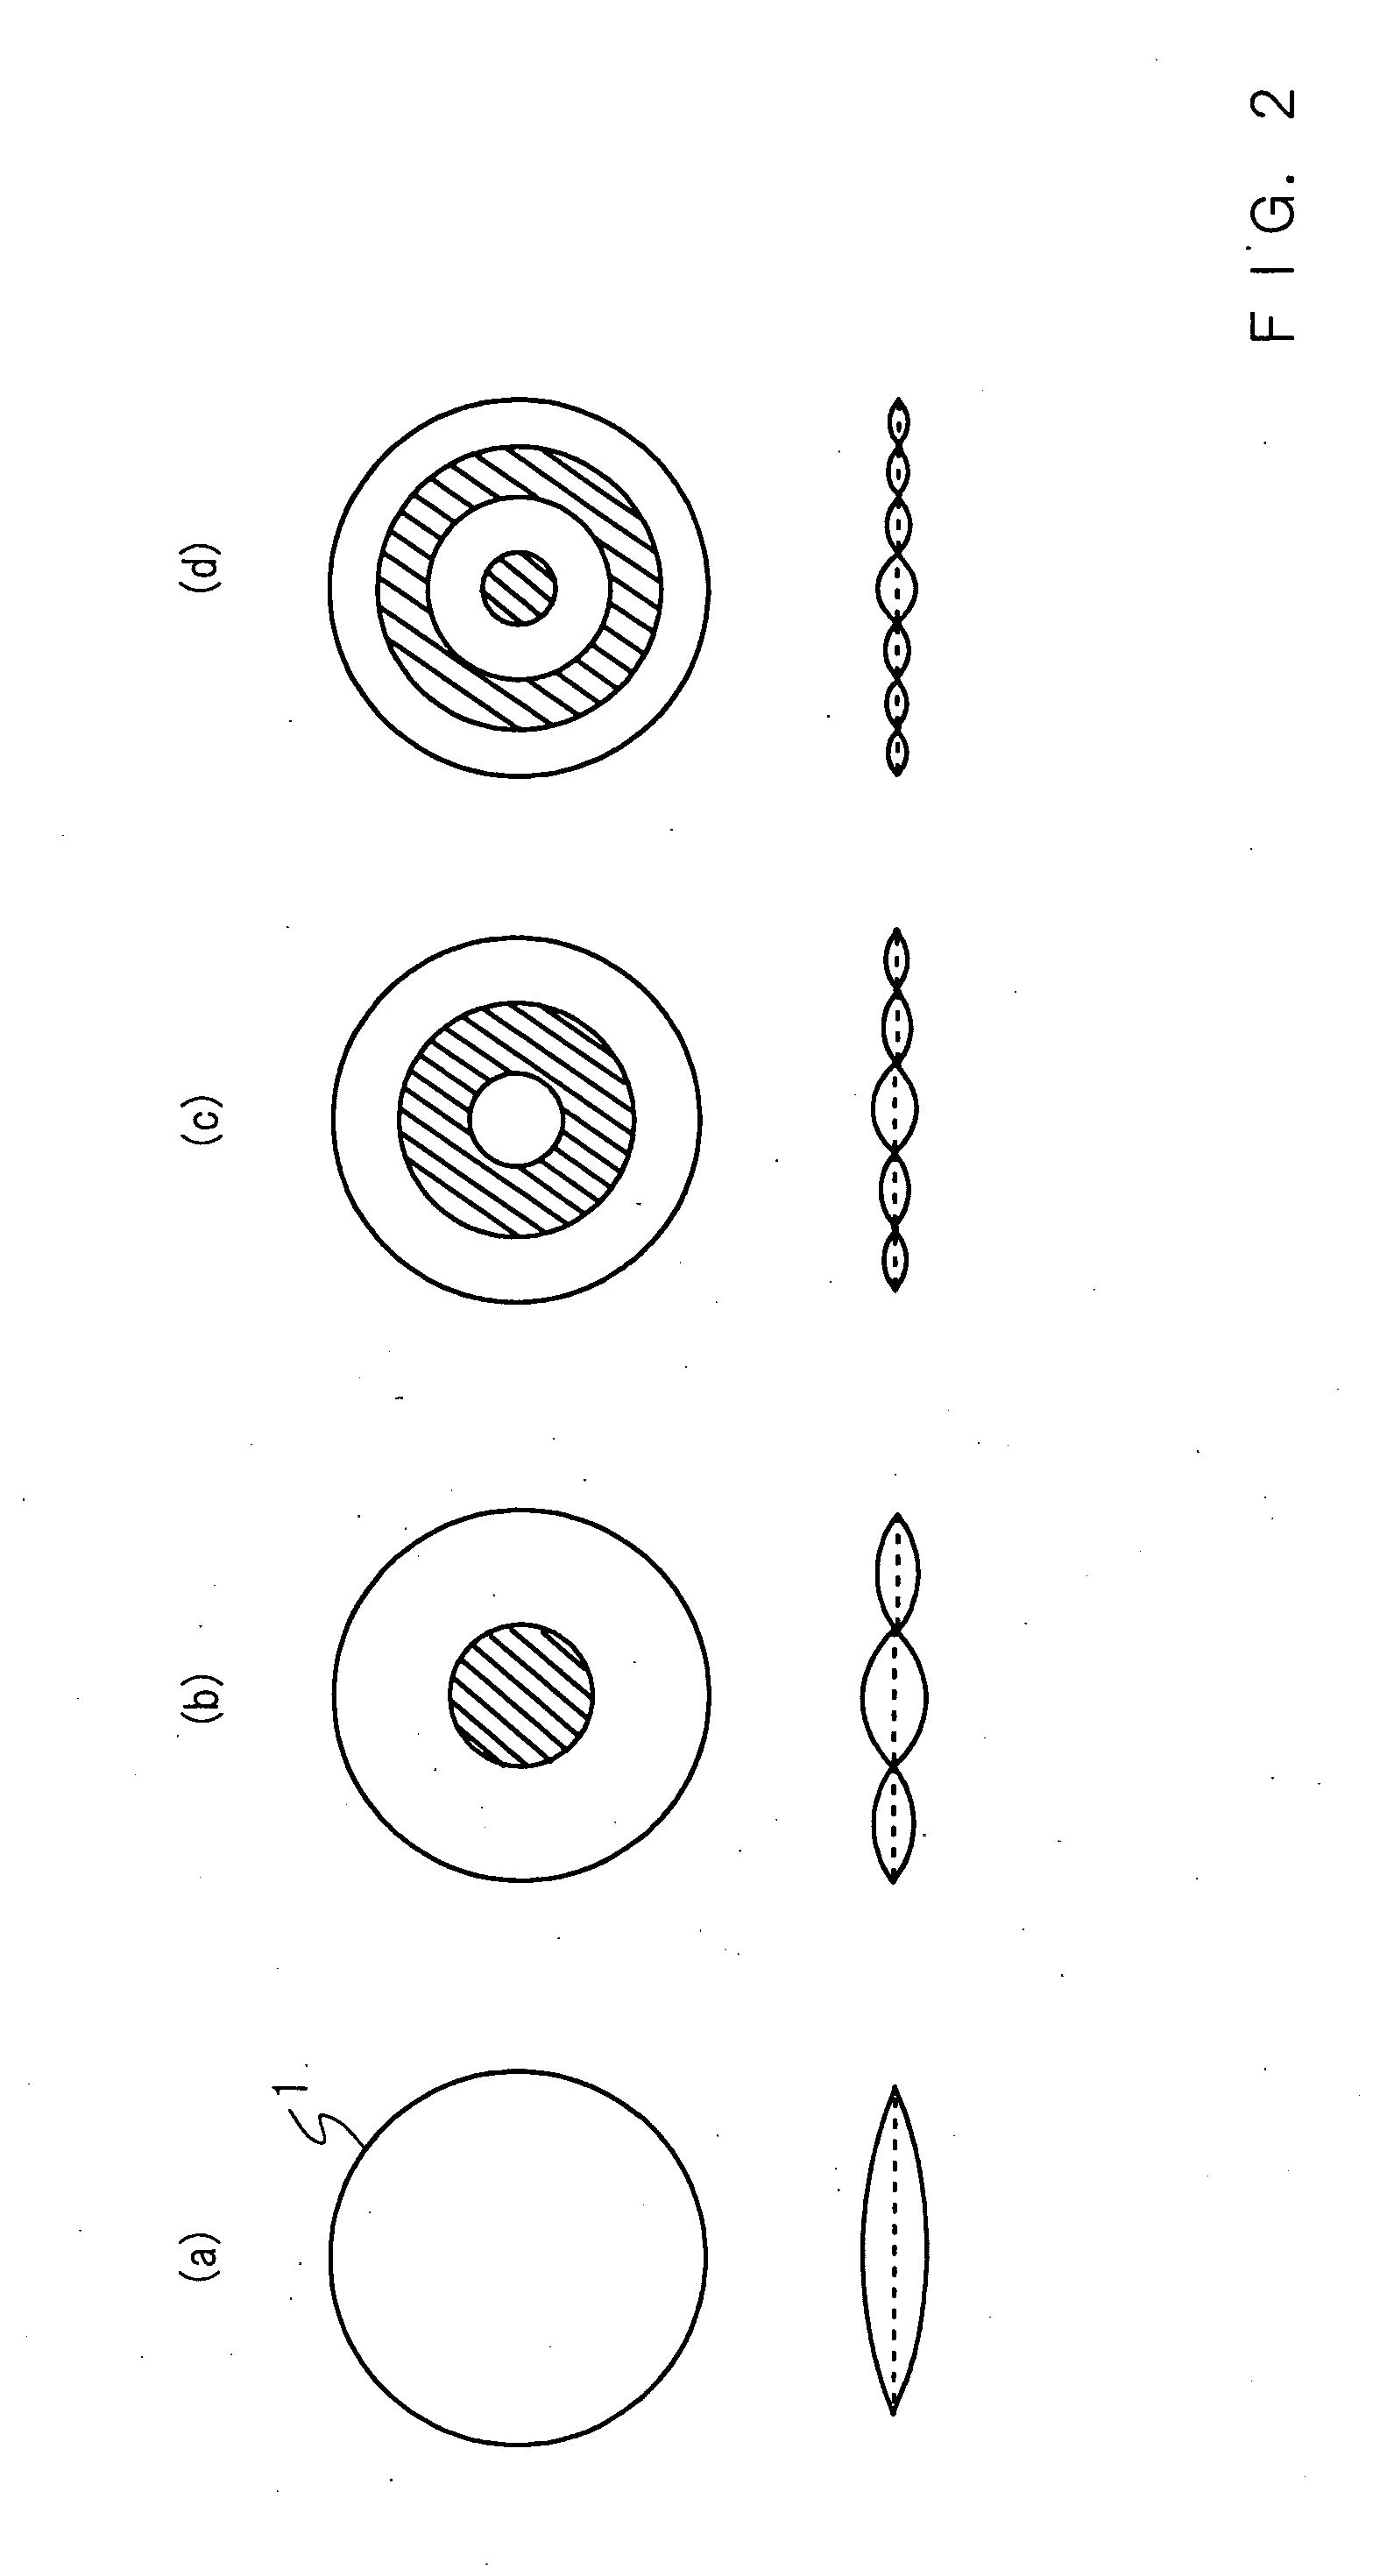 Speaker for super-high frequency range reproduction